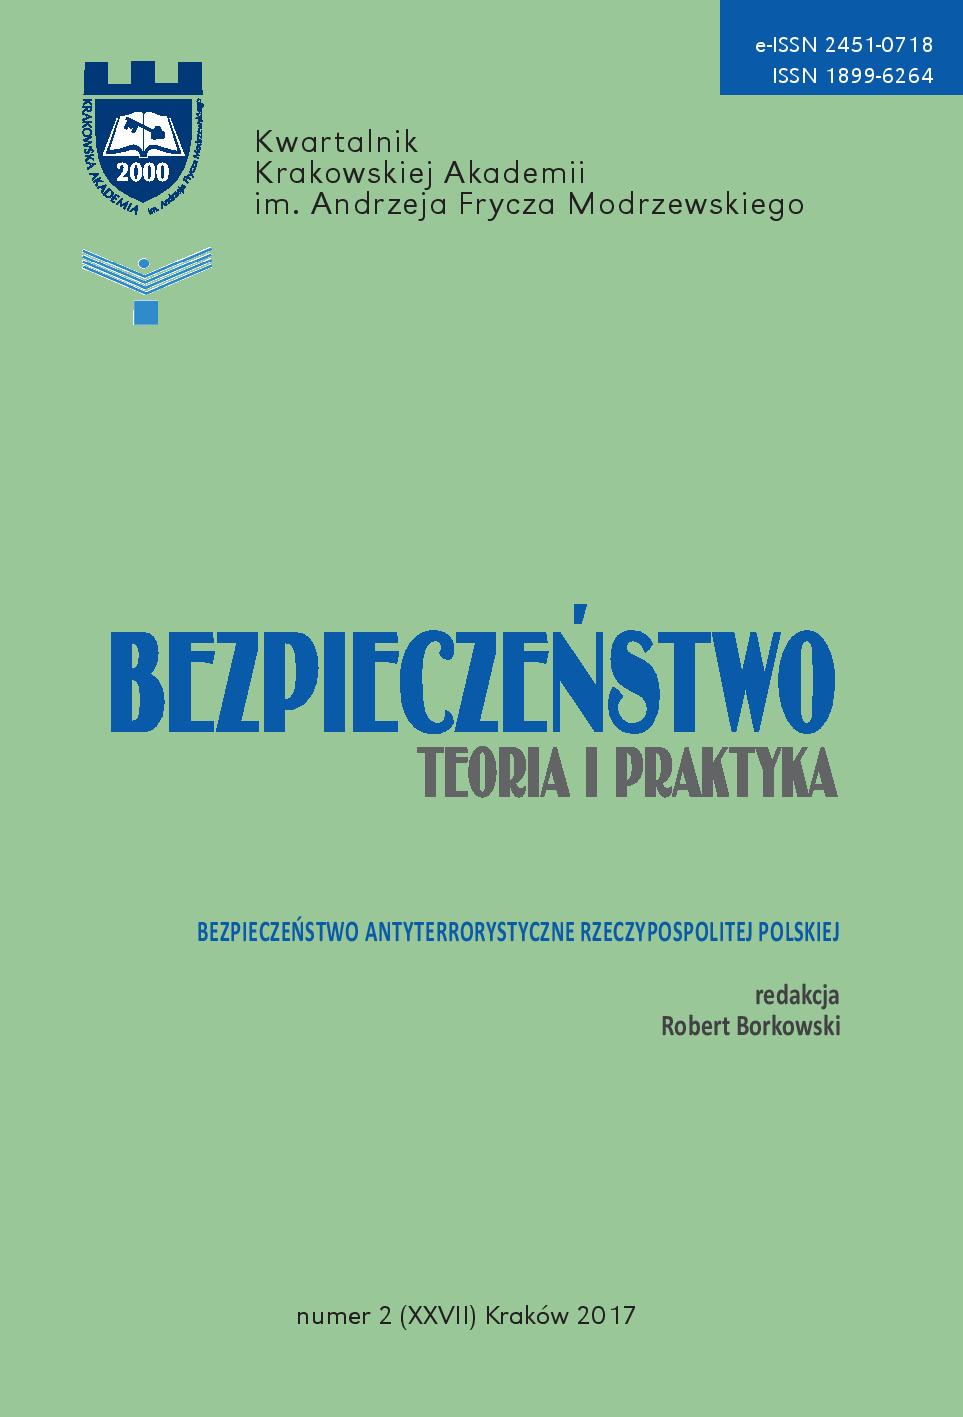 Anti-terrorism system of the Republic of Poland in the face
of the threat of modern terrorism Cover Image